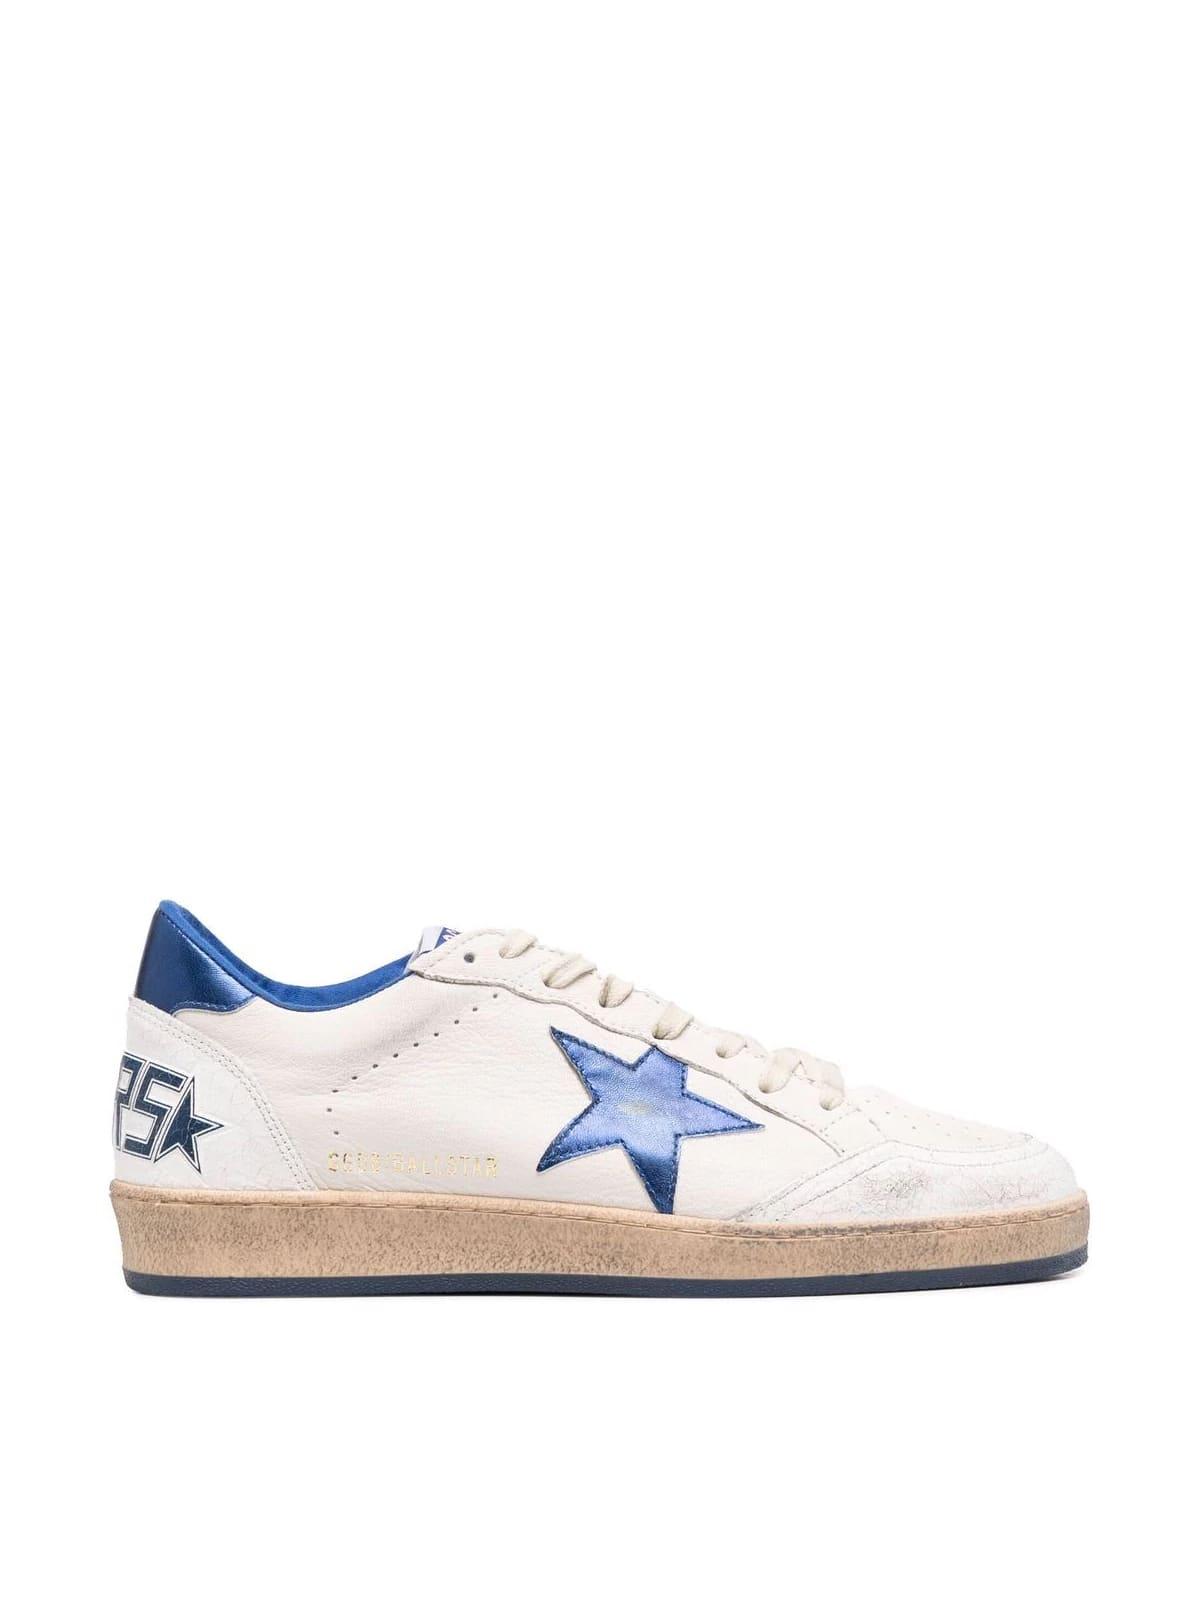 Golden Goose Leather Ball Star Nappa Upper Laminated Star And Heel Crack  Spur in White for Men - Save 23% | Lyst